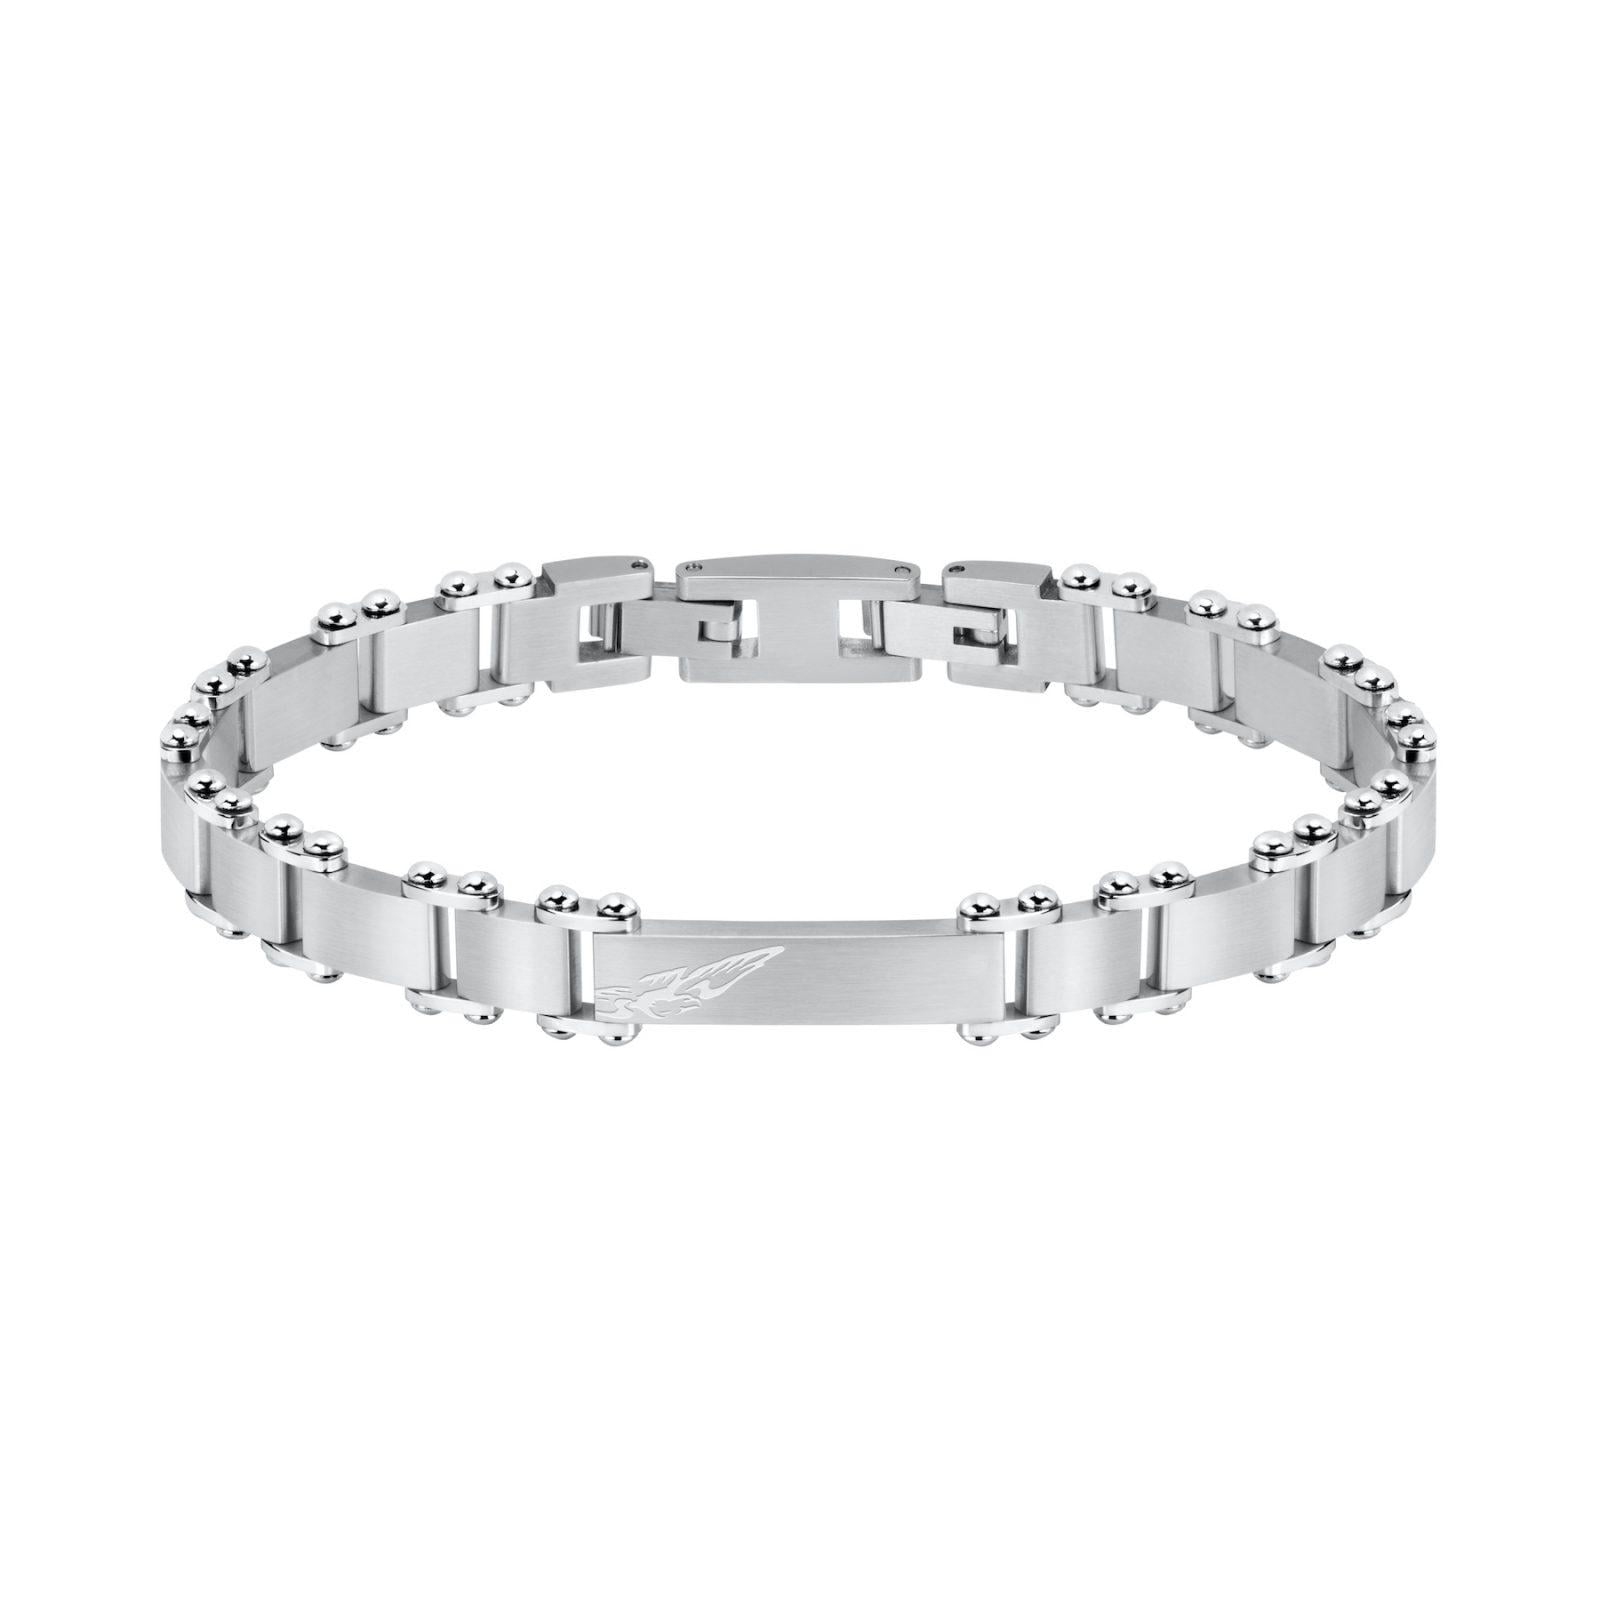 Sector No Limits Mens Basic Collection Bracelet  Length 21 cm  Steel and  Crystal  SZS44  Stainless Steel and Crystal Stainless Steel Crystal   Amazoncombe Fashion